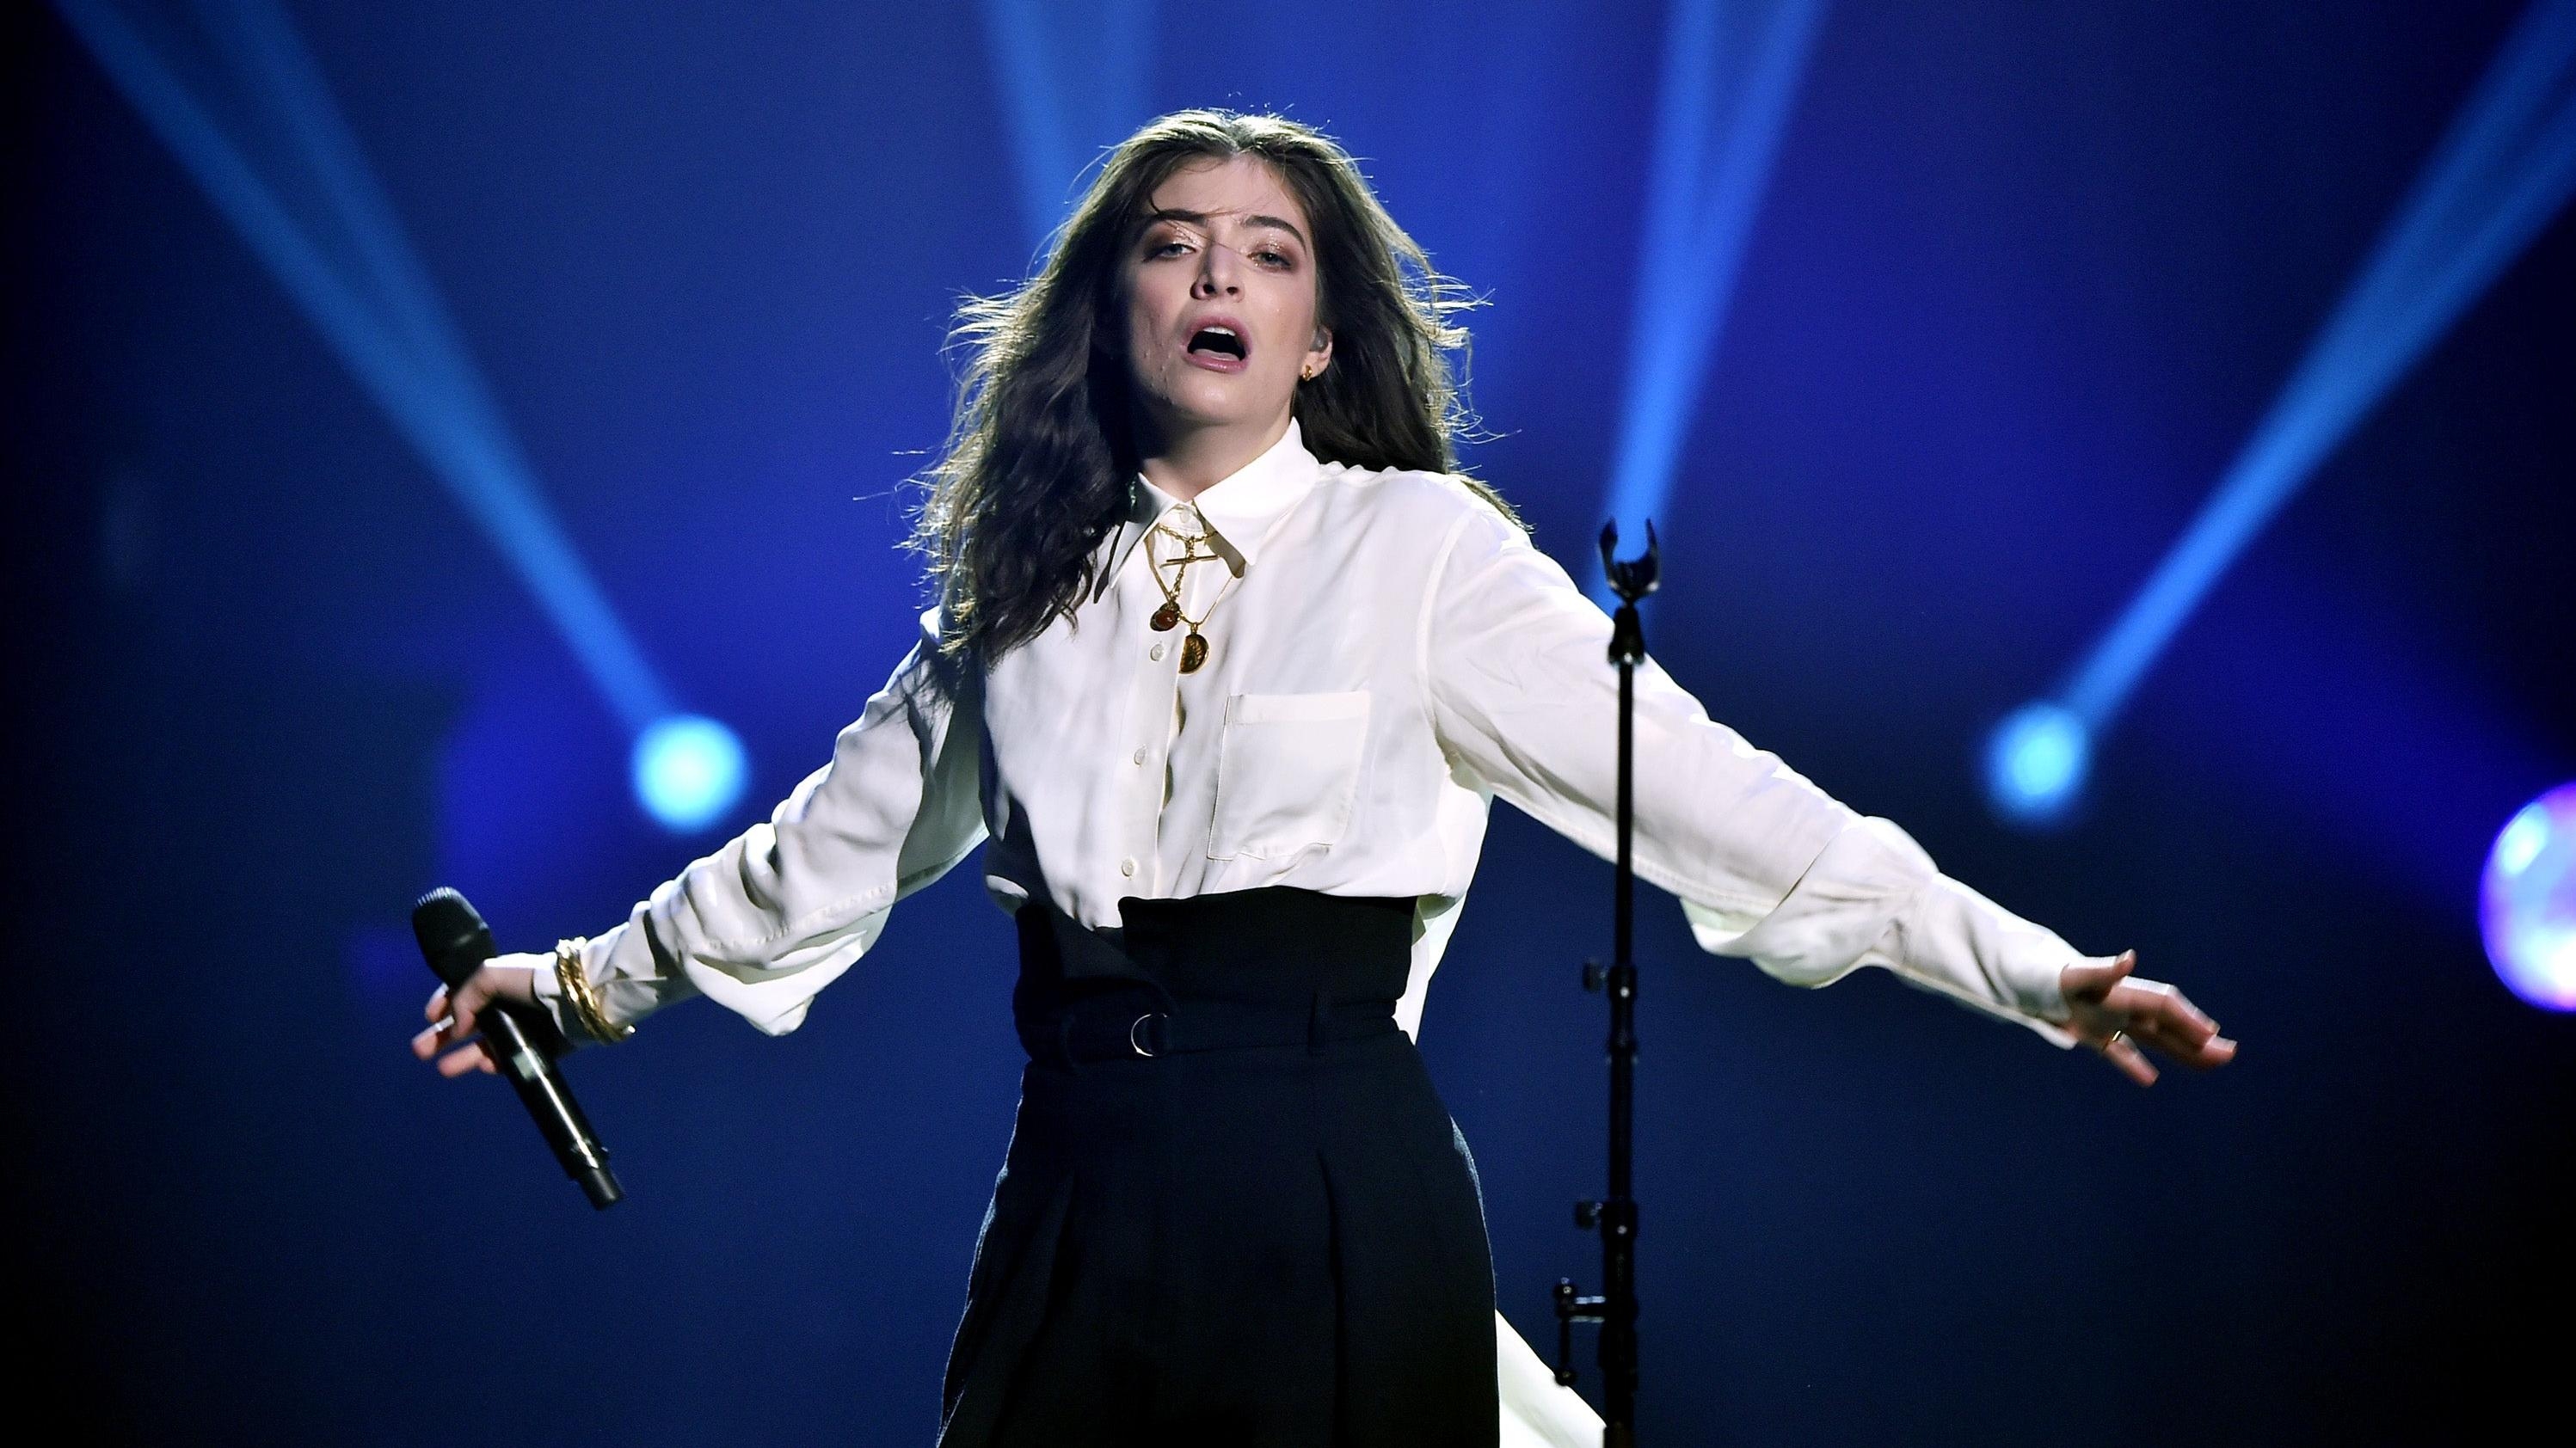 Lorde's announced her first live show in years and a new album feels imminent